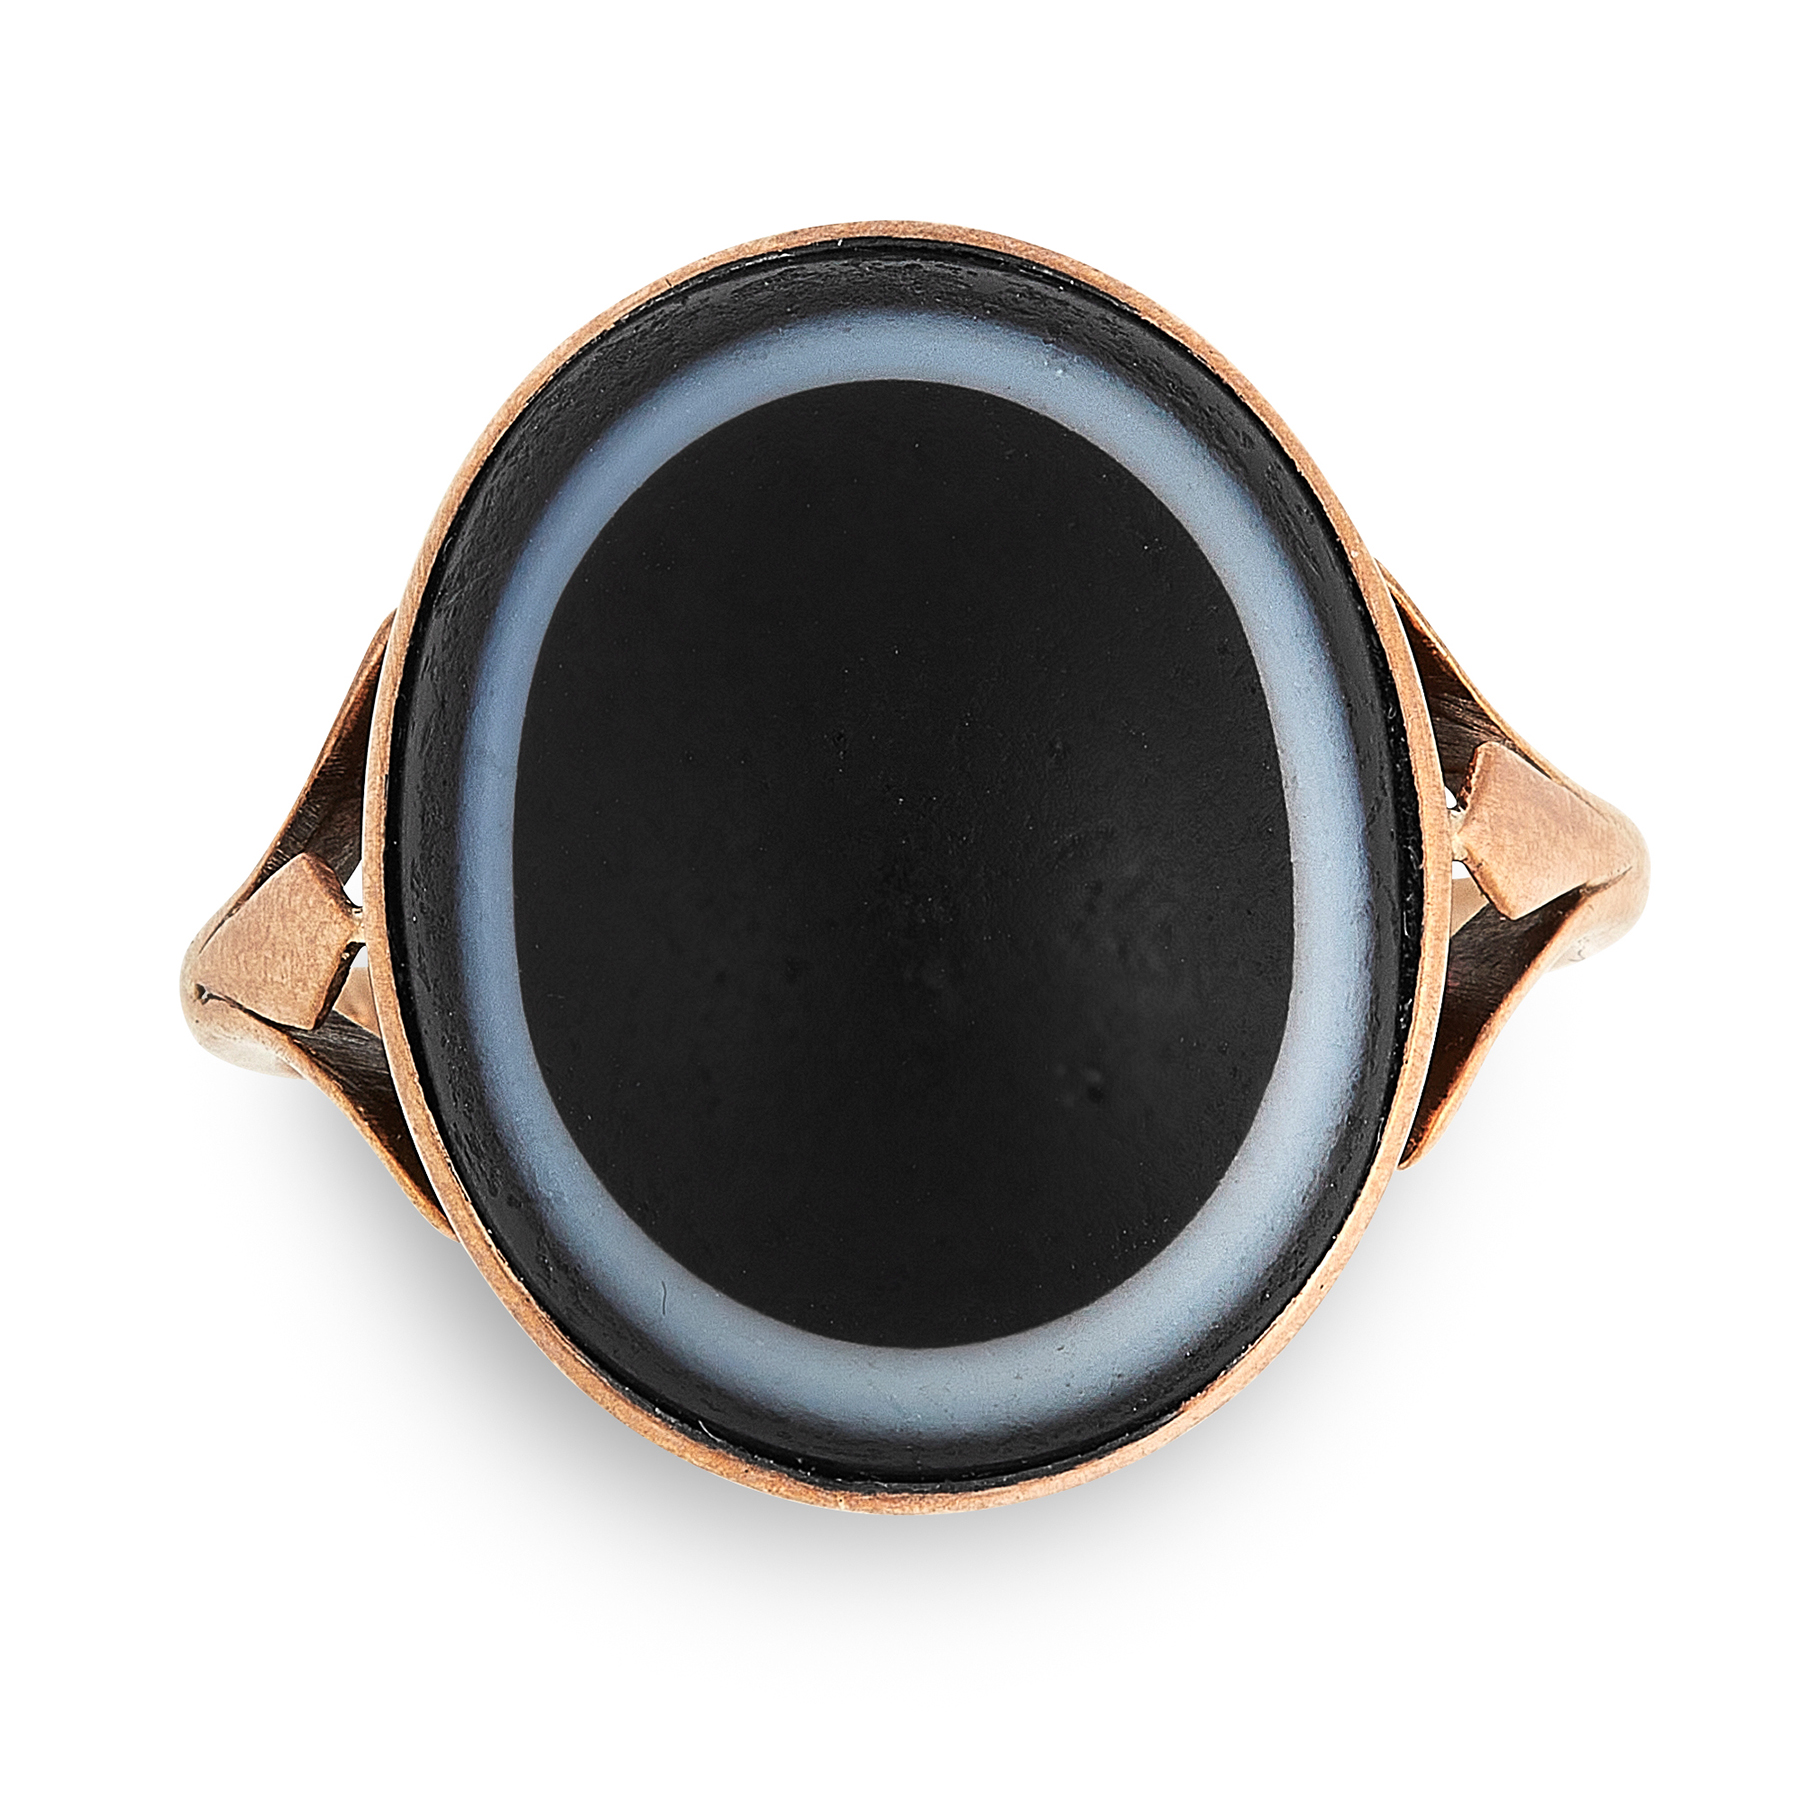 AN ANTIQUE BANDED AGATE RING in yellow gold, the bifurcated shank set with an oval banded agate